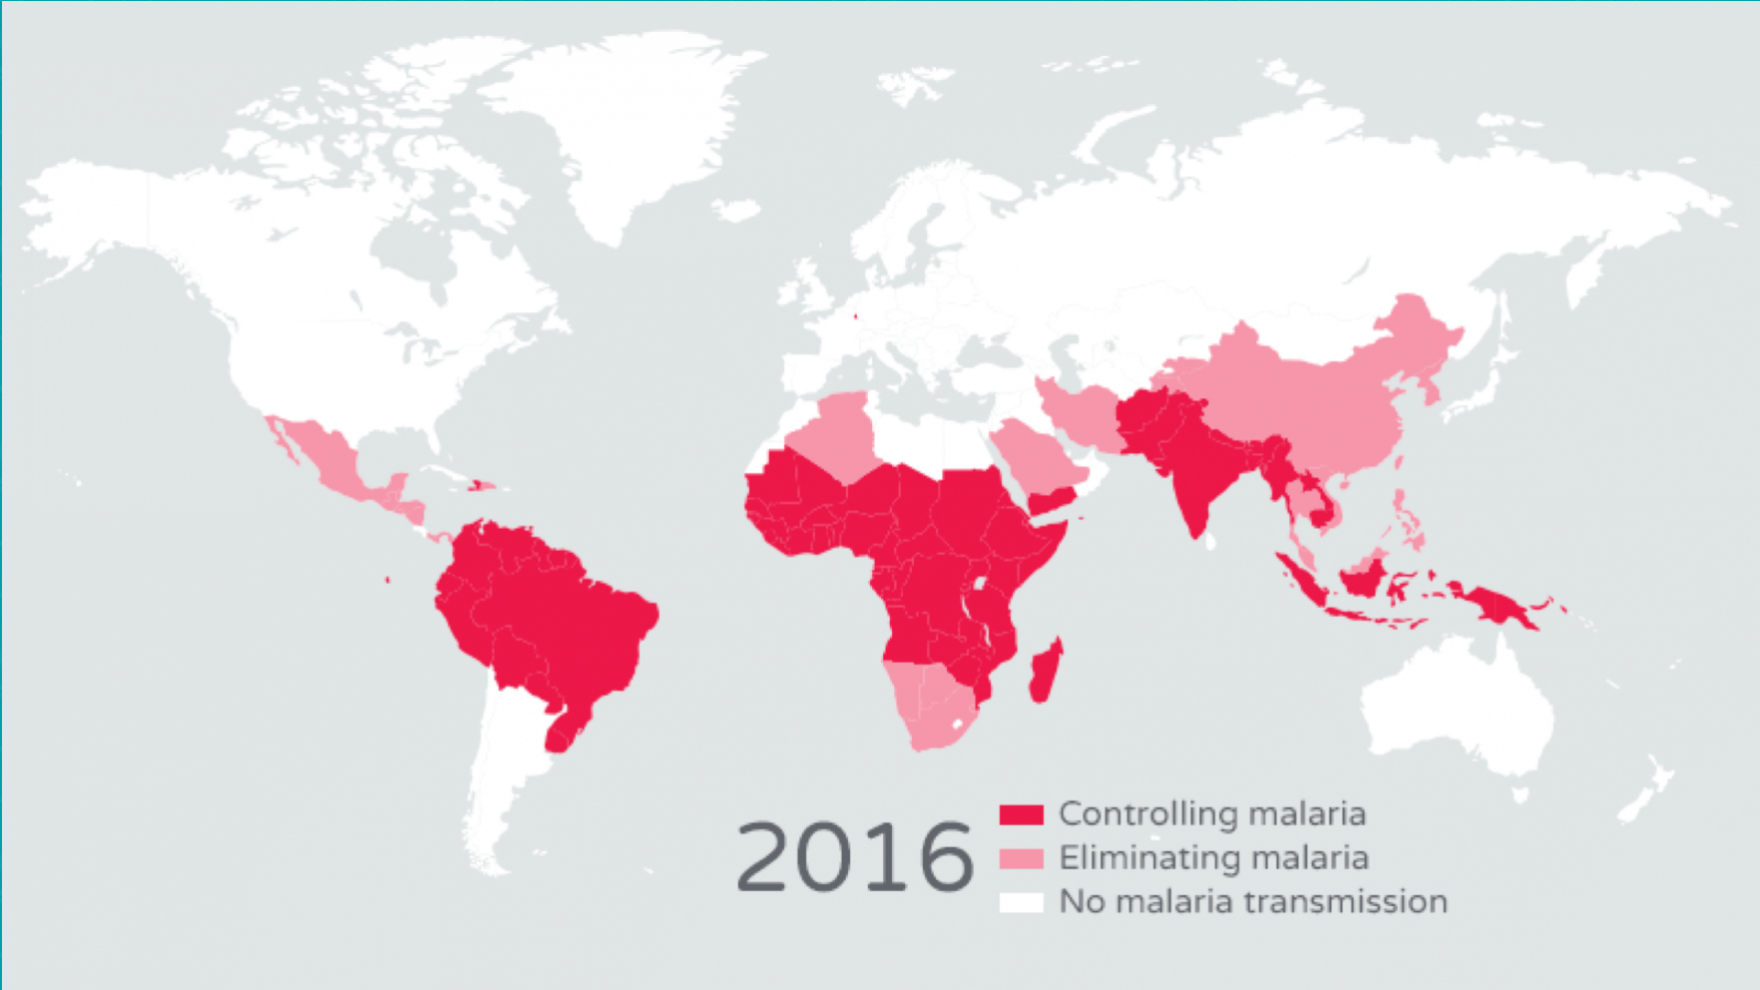 Global Push to Eradicate Malaria Boosted by 29M Grant to Malaria